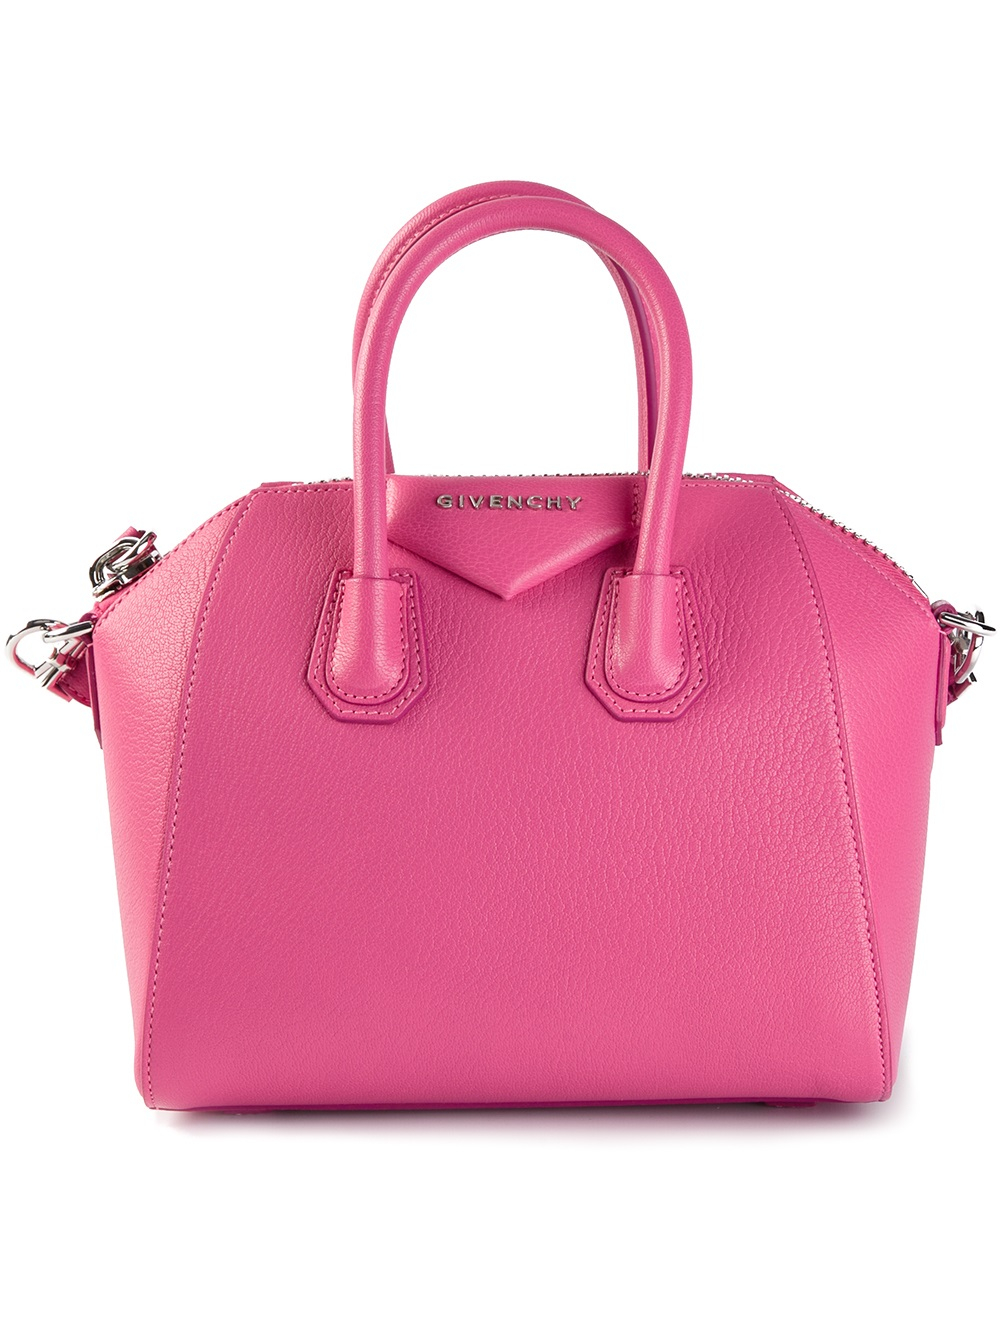 Givenchy Antigona Tote in Pink (pink & purple) | Lyst